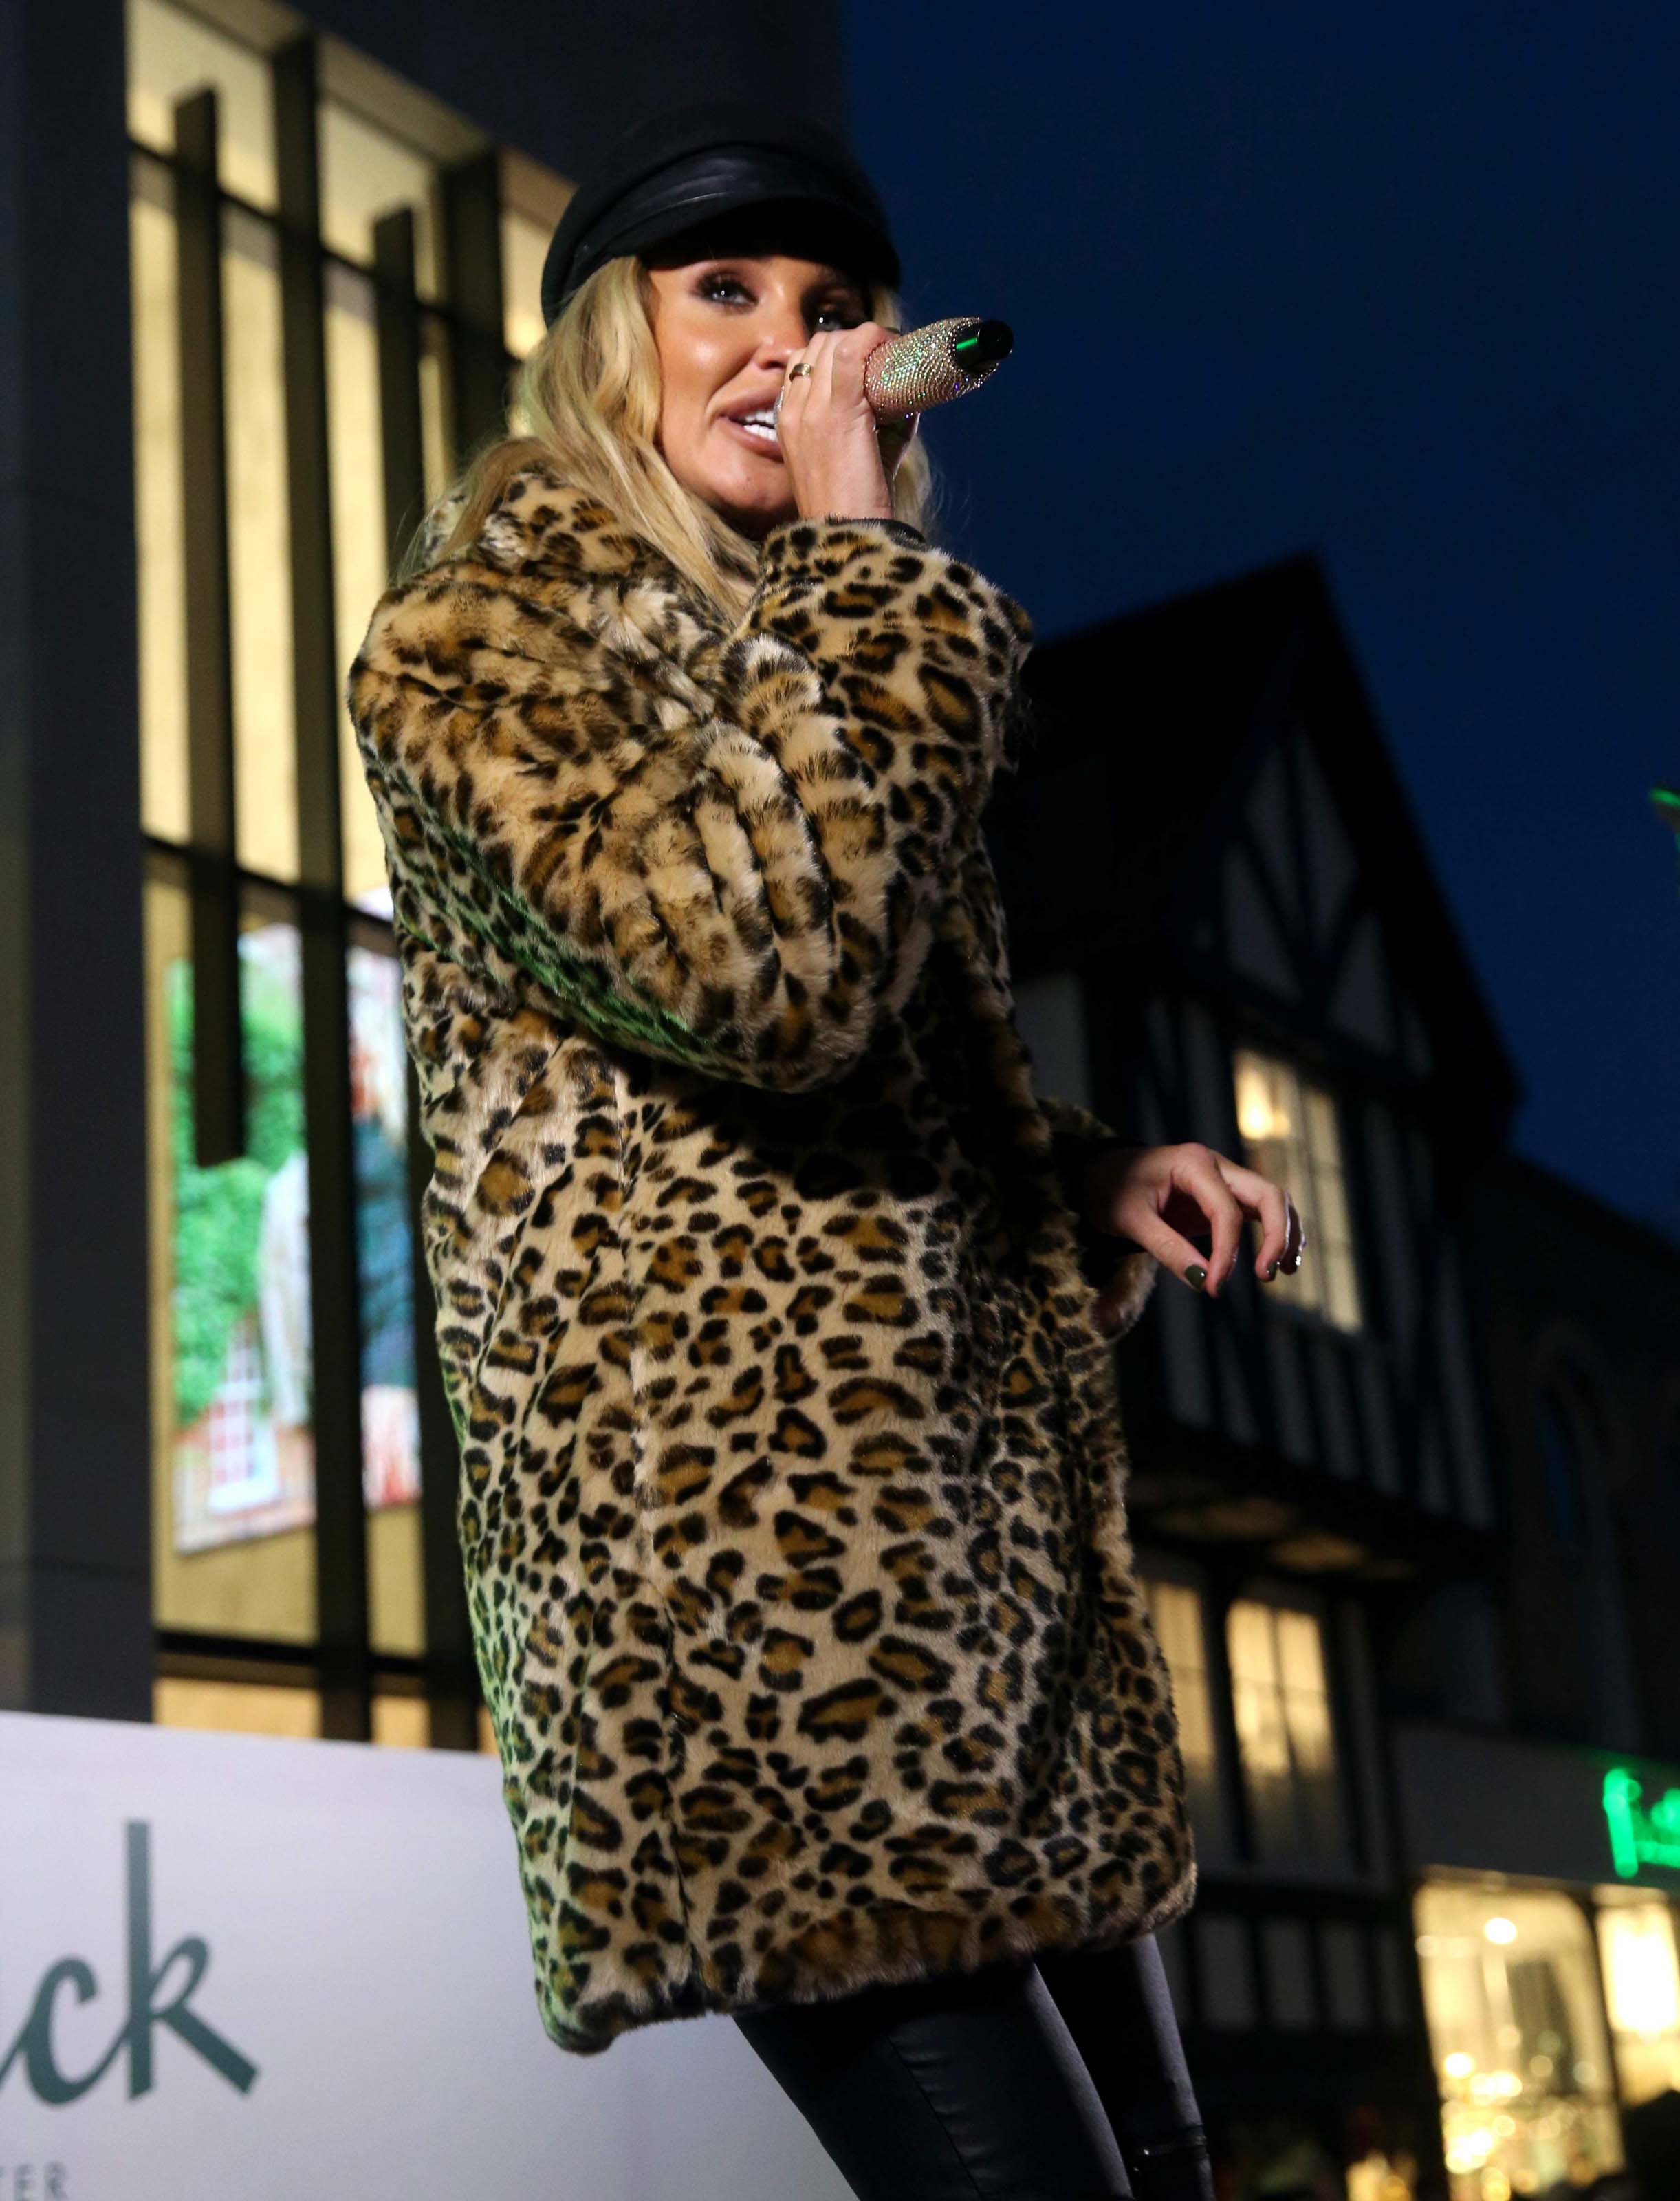 Megan McKenna performs at the Colchester Christmas lights switch